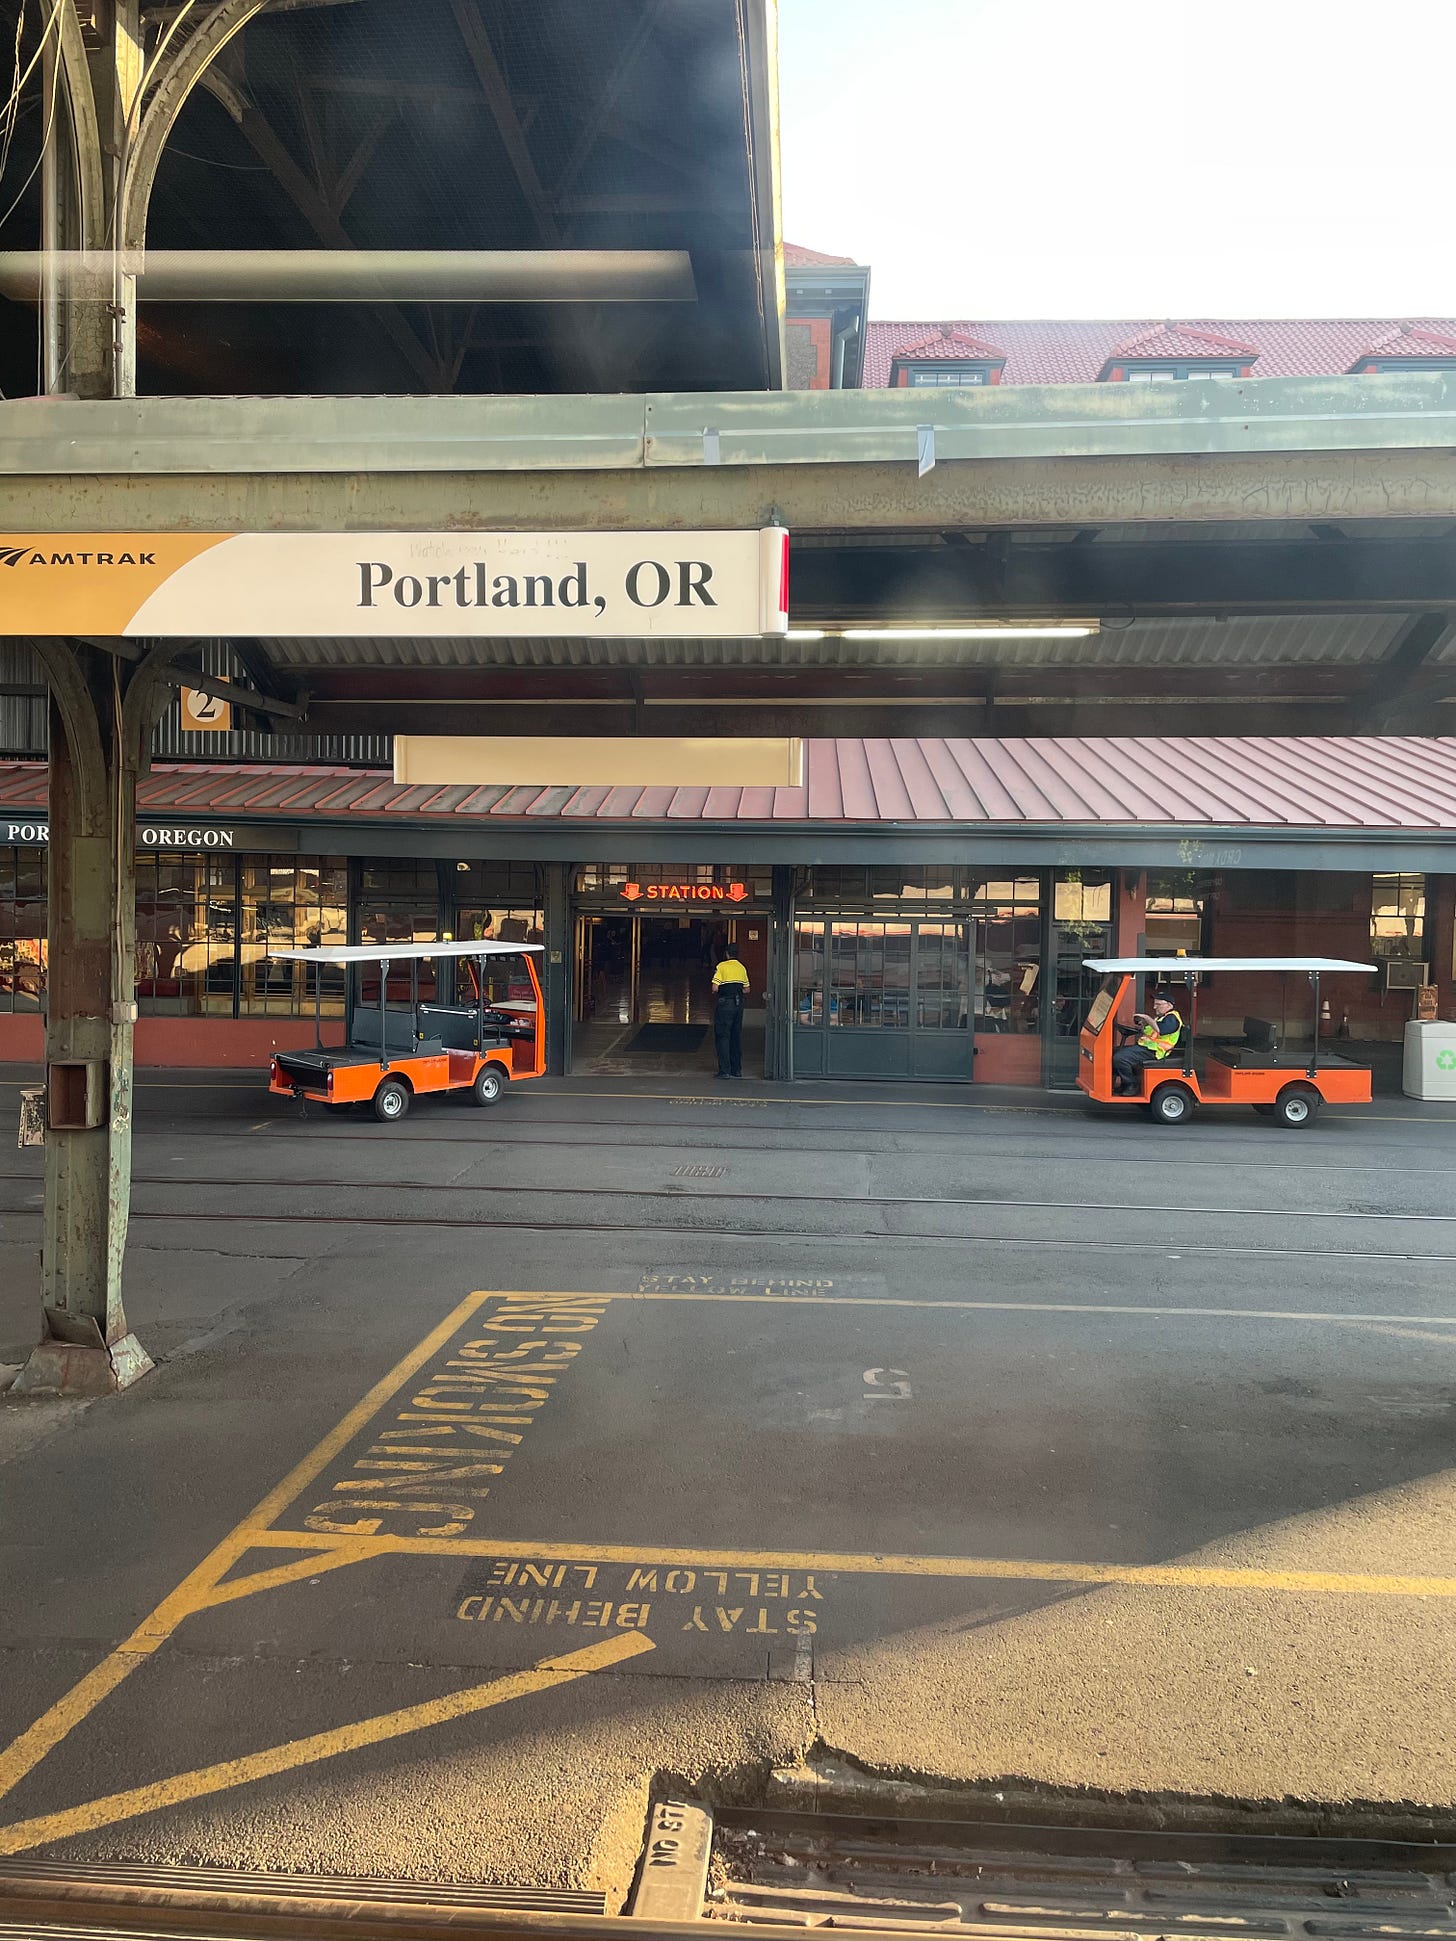 View of Portland Union Station from aboard a train